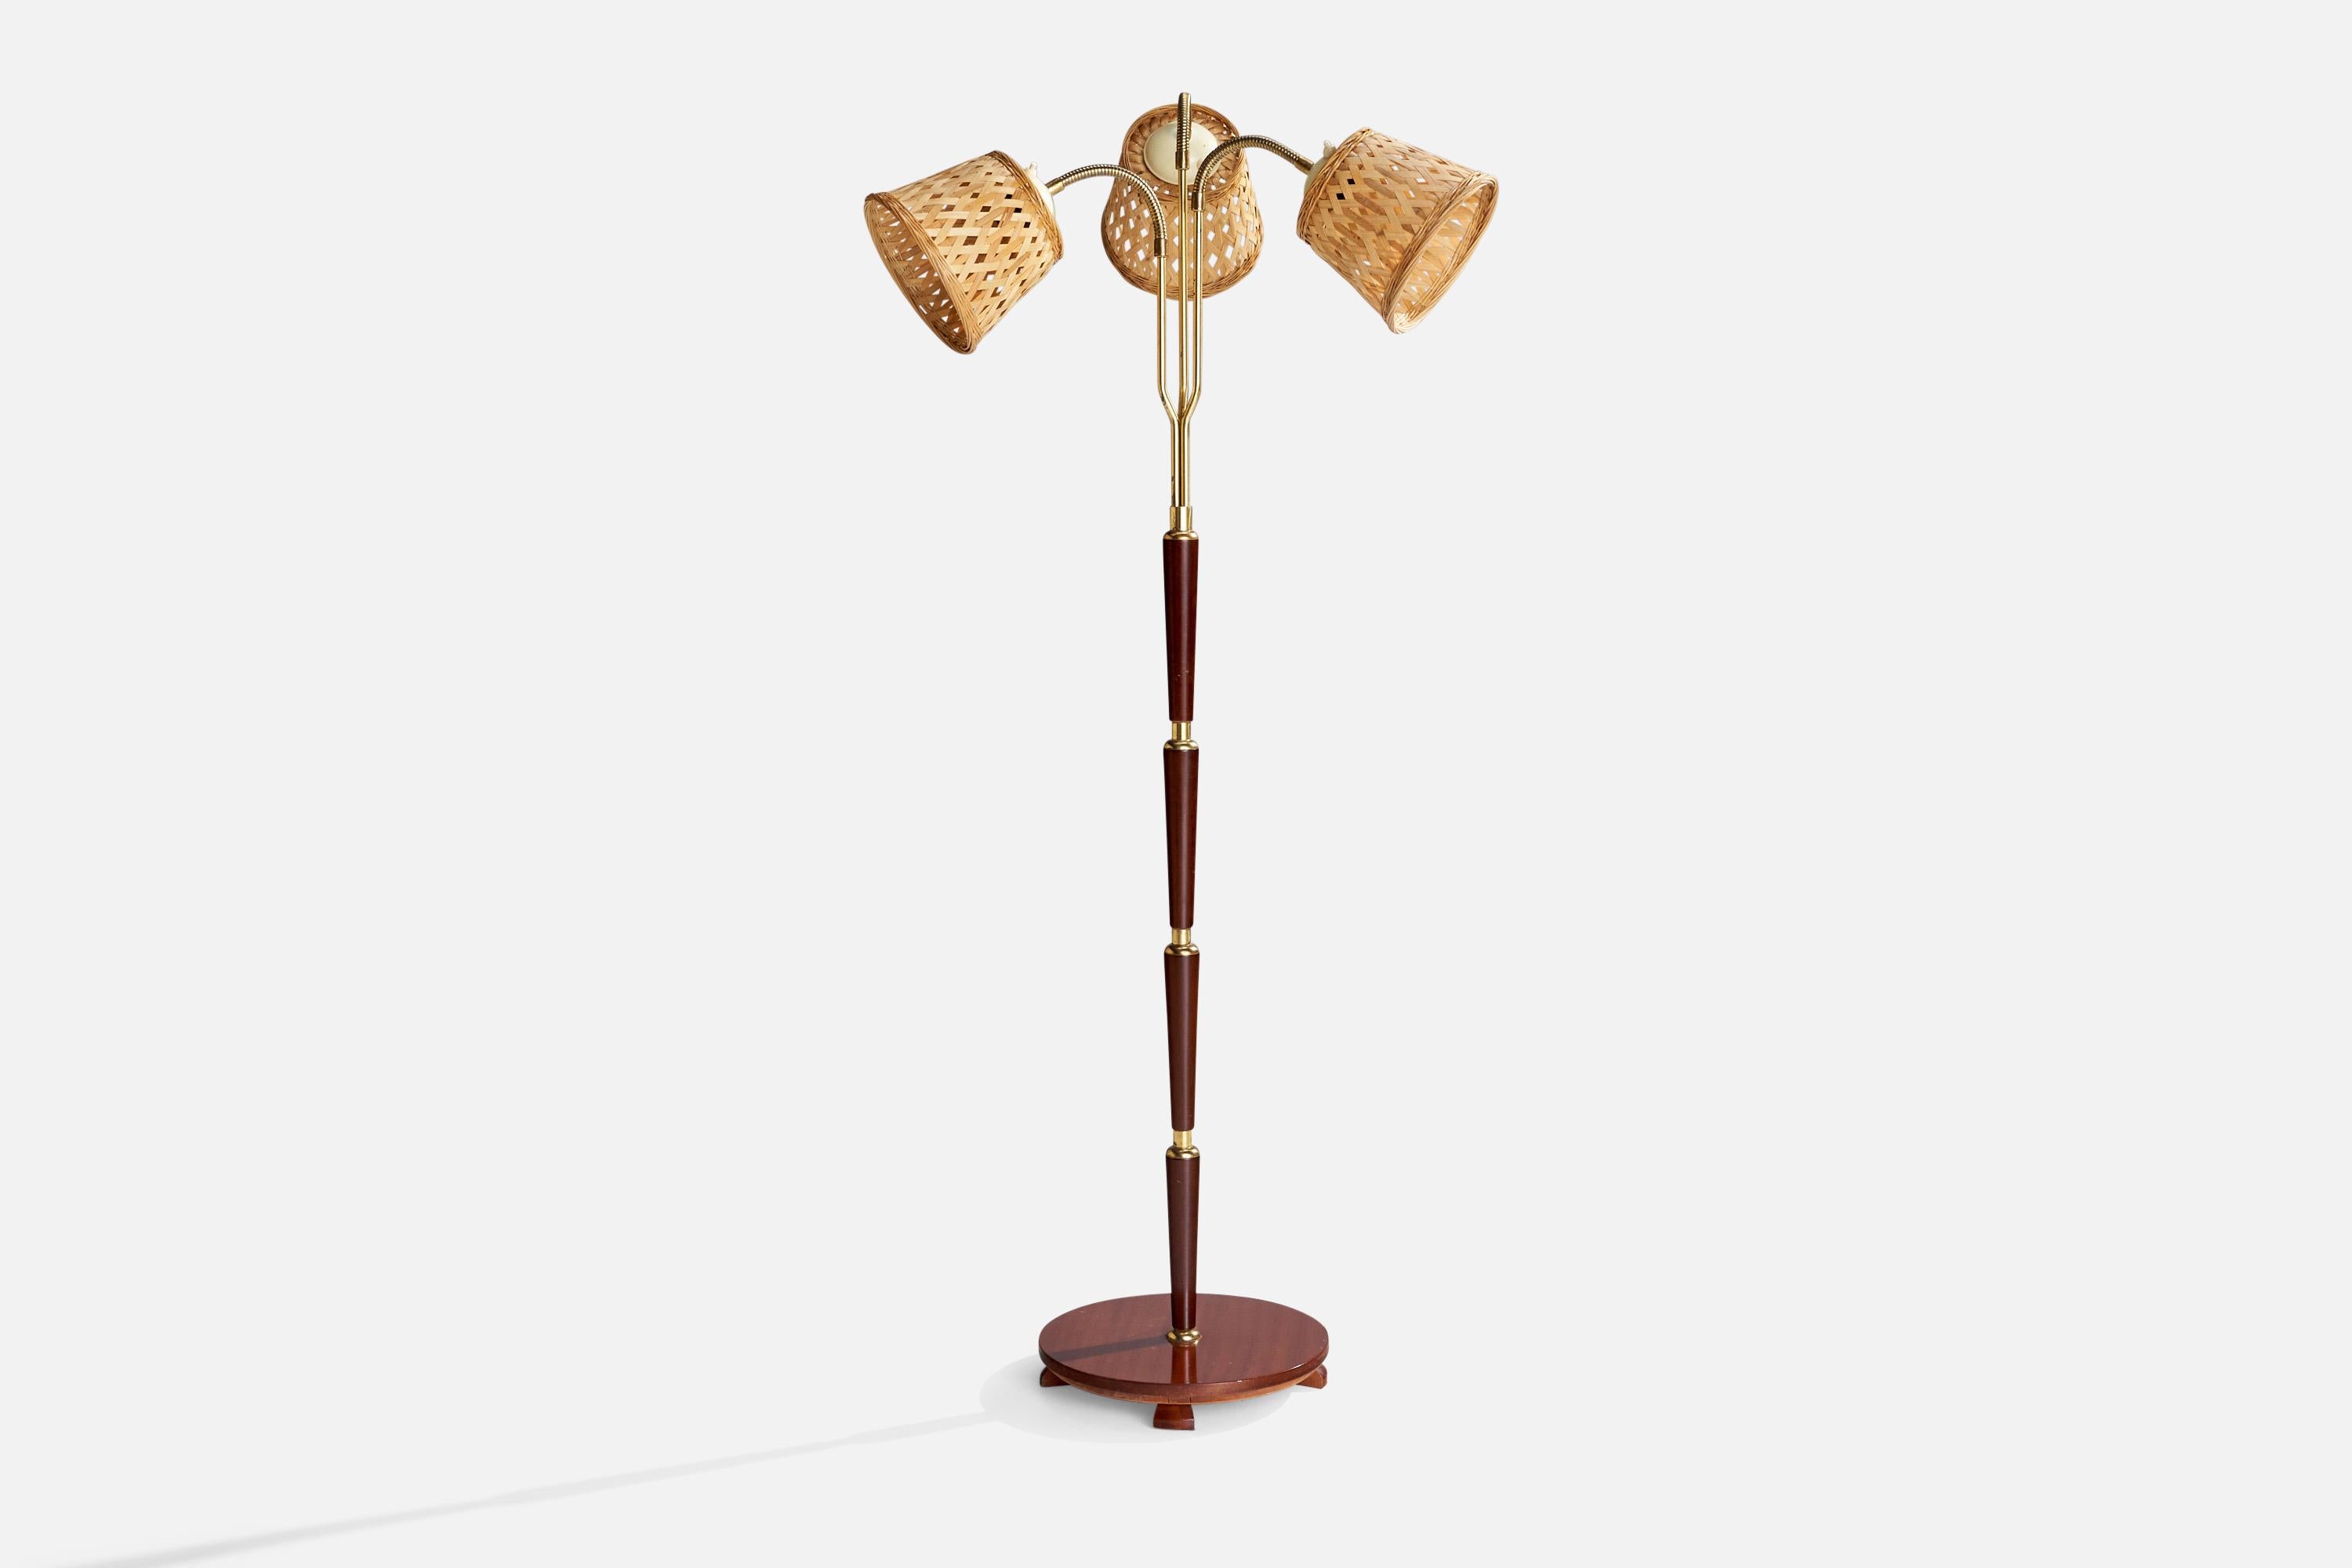 An adjustable three-armed teak, brass and rattan floor lamp designed and produced in Sweden, 1950s.

Overall Dimensions (inches): 63.87” H x 24.5” W x 26.25”  D
Stated dimensions include shade.
Bulb Specifications: E-26 Bulb
Number of Sockets: 3
All